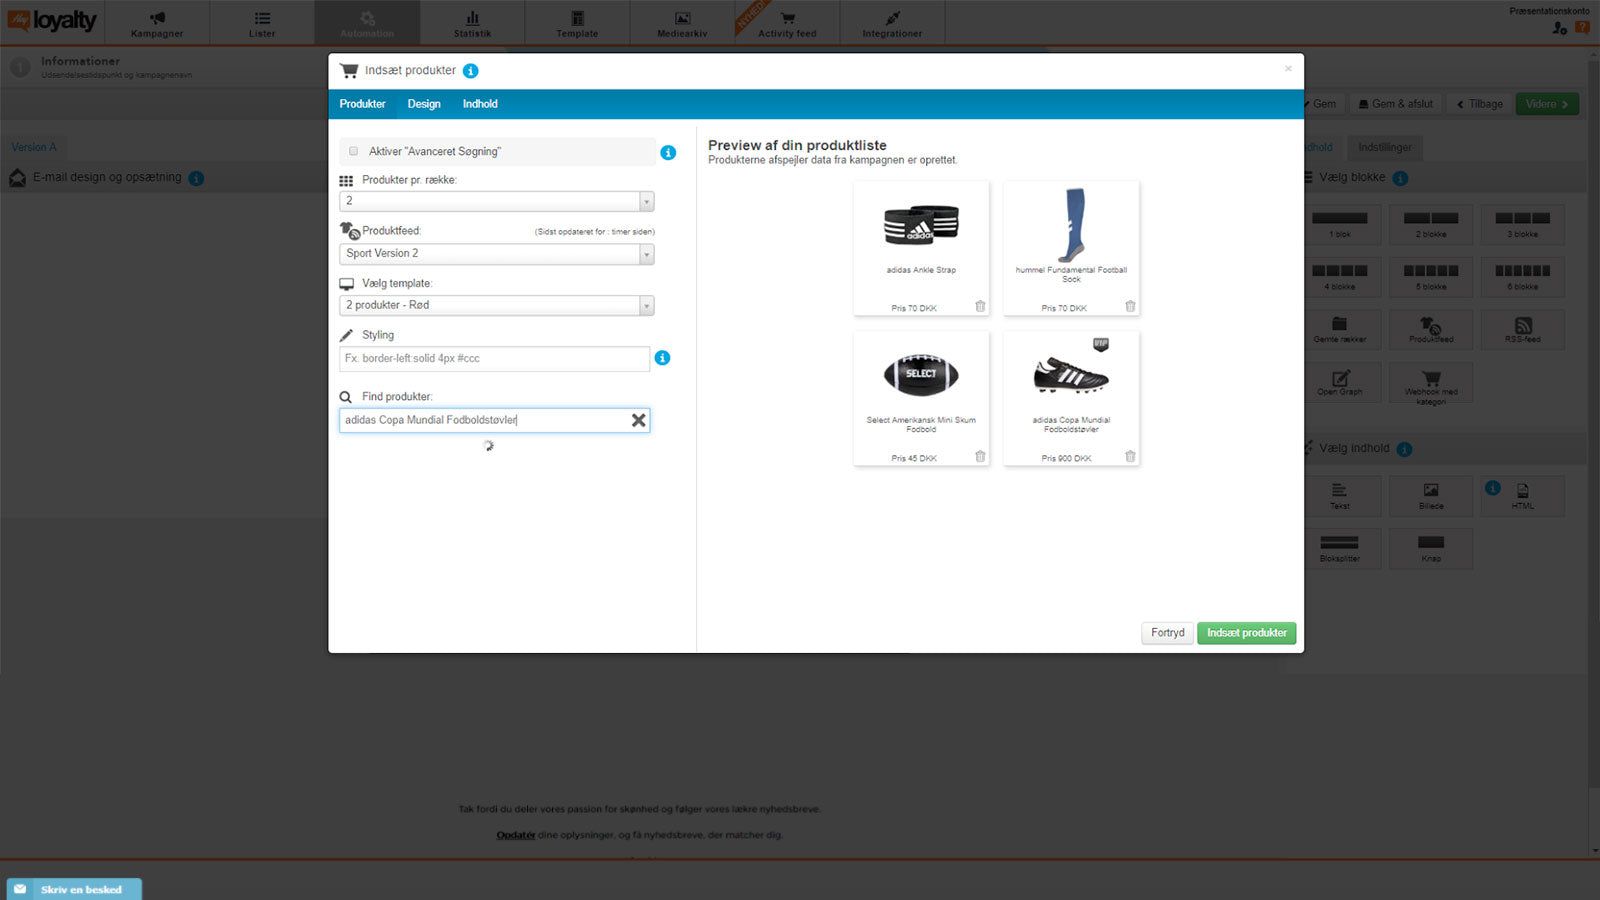 Search products from your productfeed and insert with one click